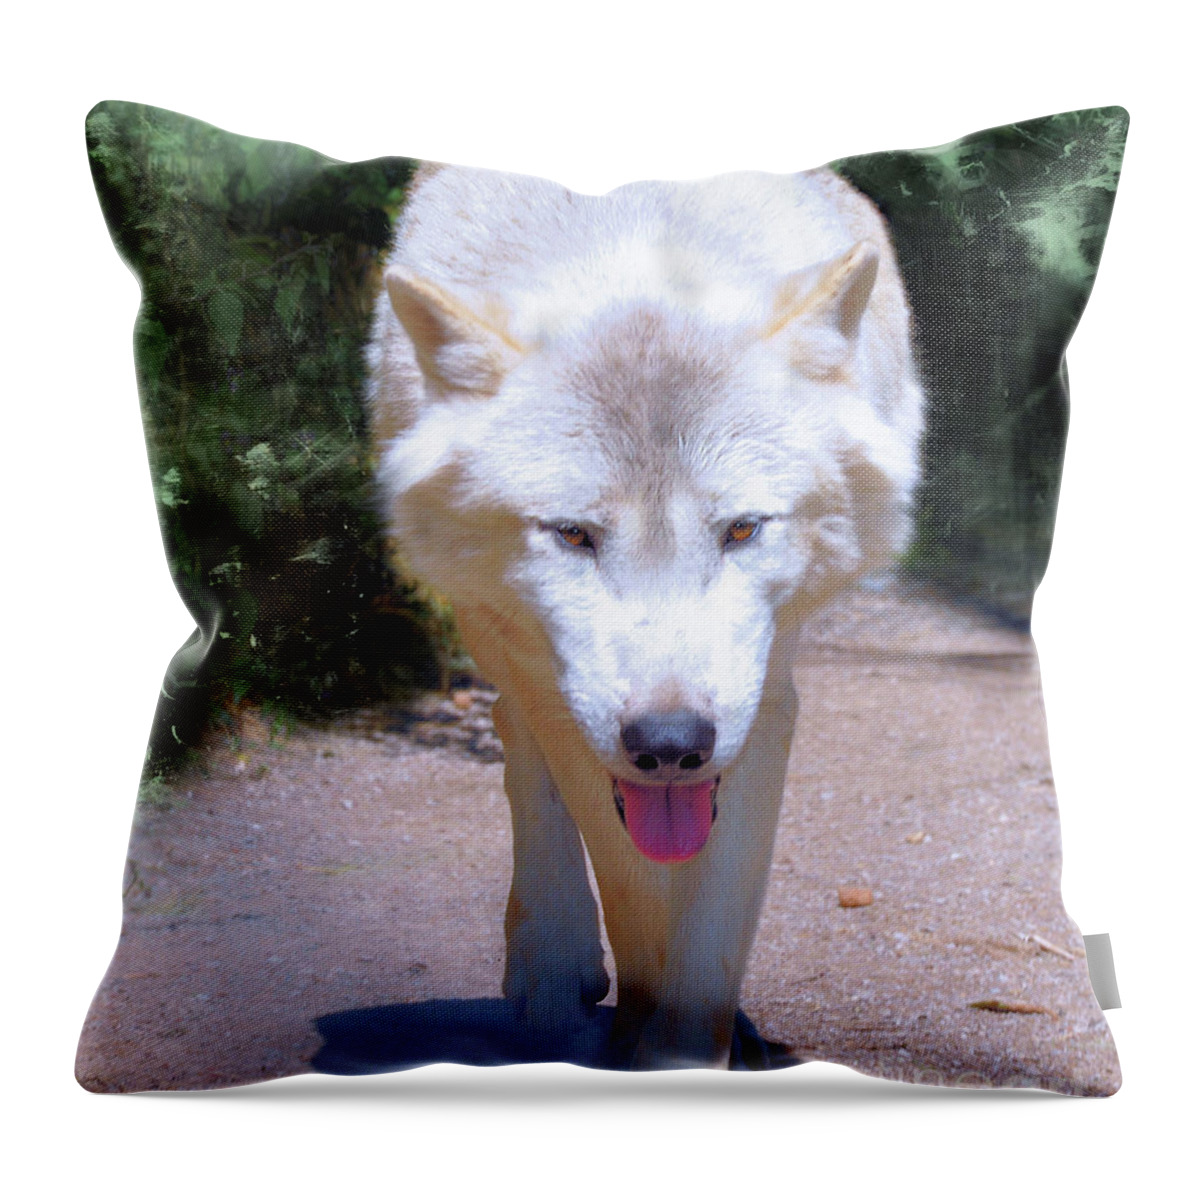 Wolf Throw Pillow featuring the photograph The White Wolf by Elaine Manley